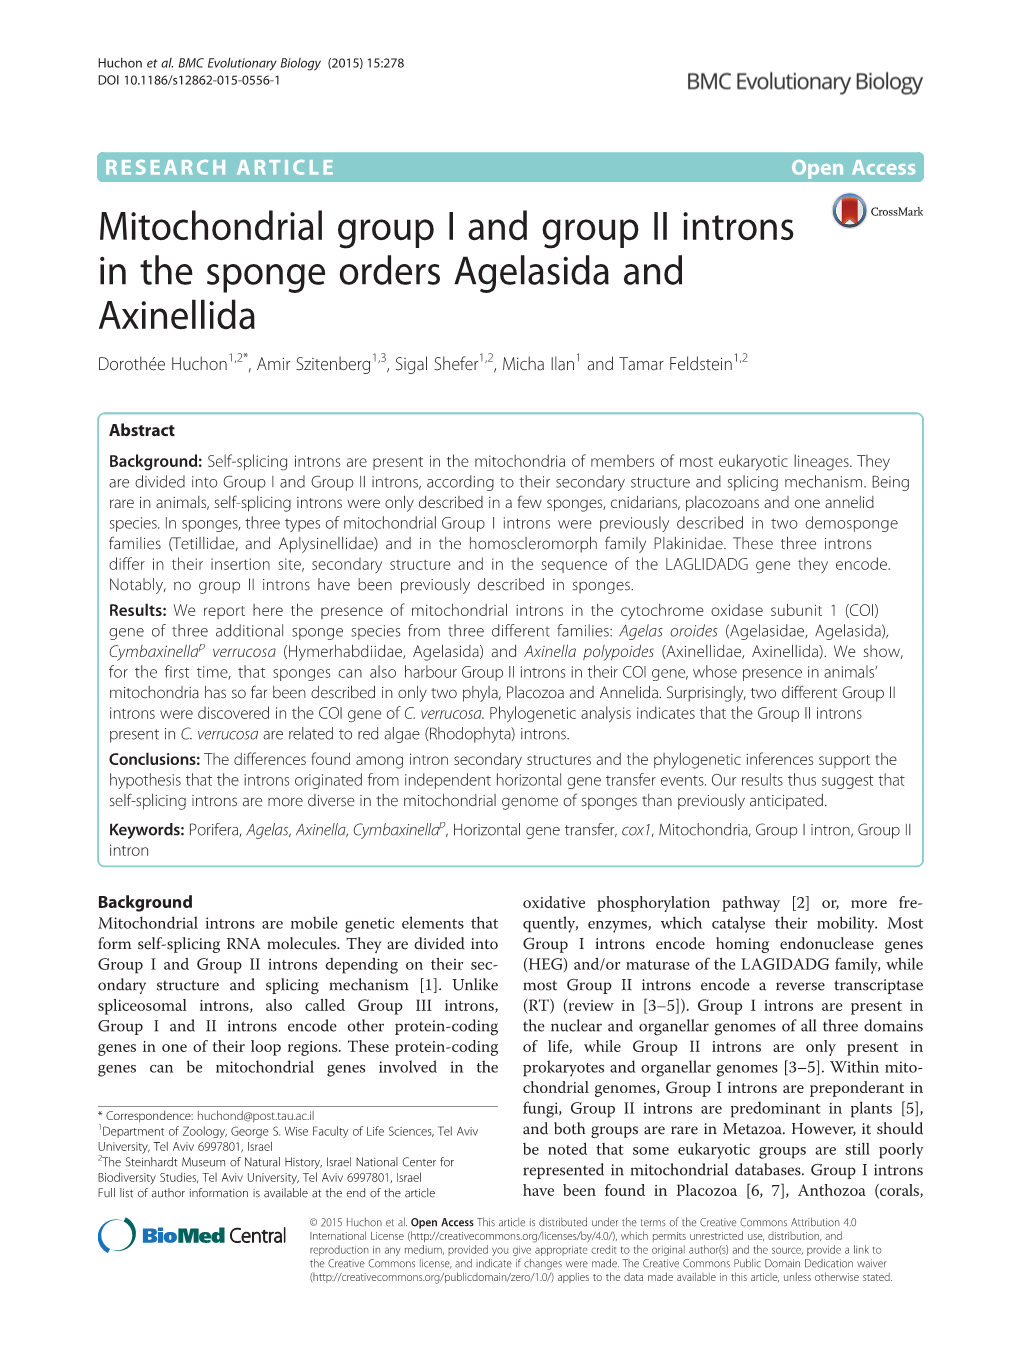 Mitochondrial Group I and Group II Introns in the Sponge Orders